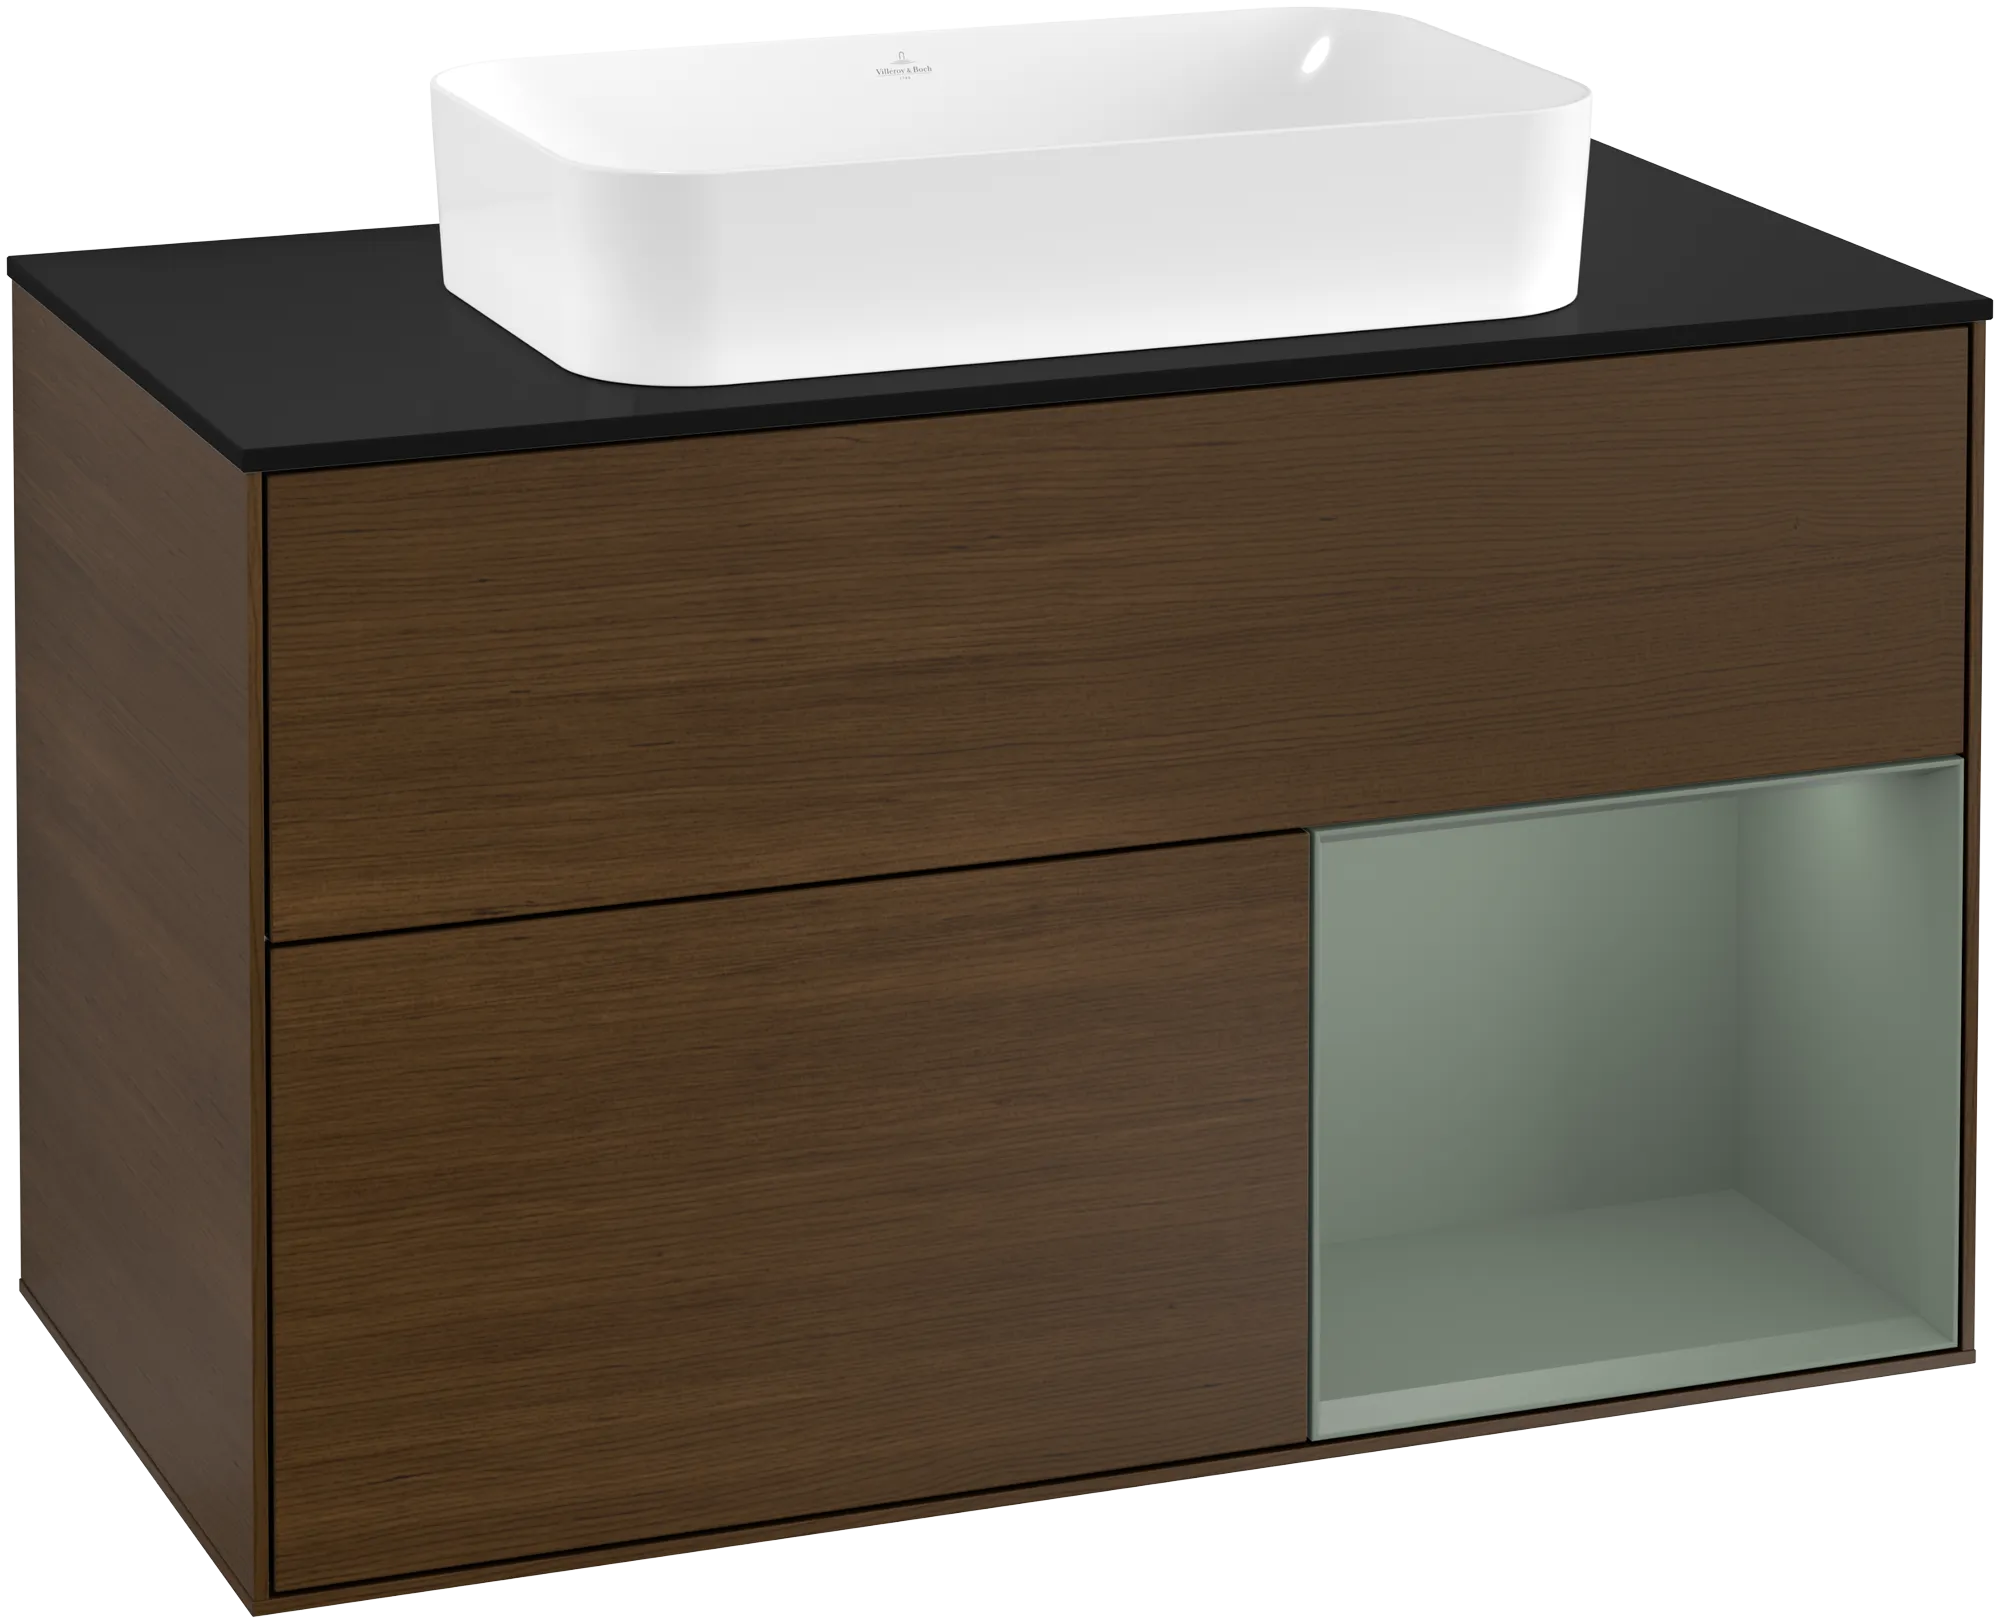 Picture of VILLEROY BOCH Finion Vanity unit, with lighting, 2 pull-out compartments, 1000 x 603 x 501 mm, Walnut Veneer / Olive Matt Lacquer / Glass Black Matt #G252GMGN